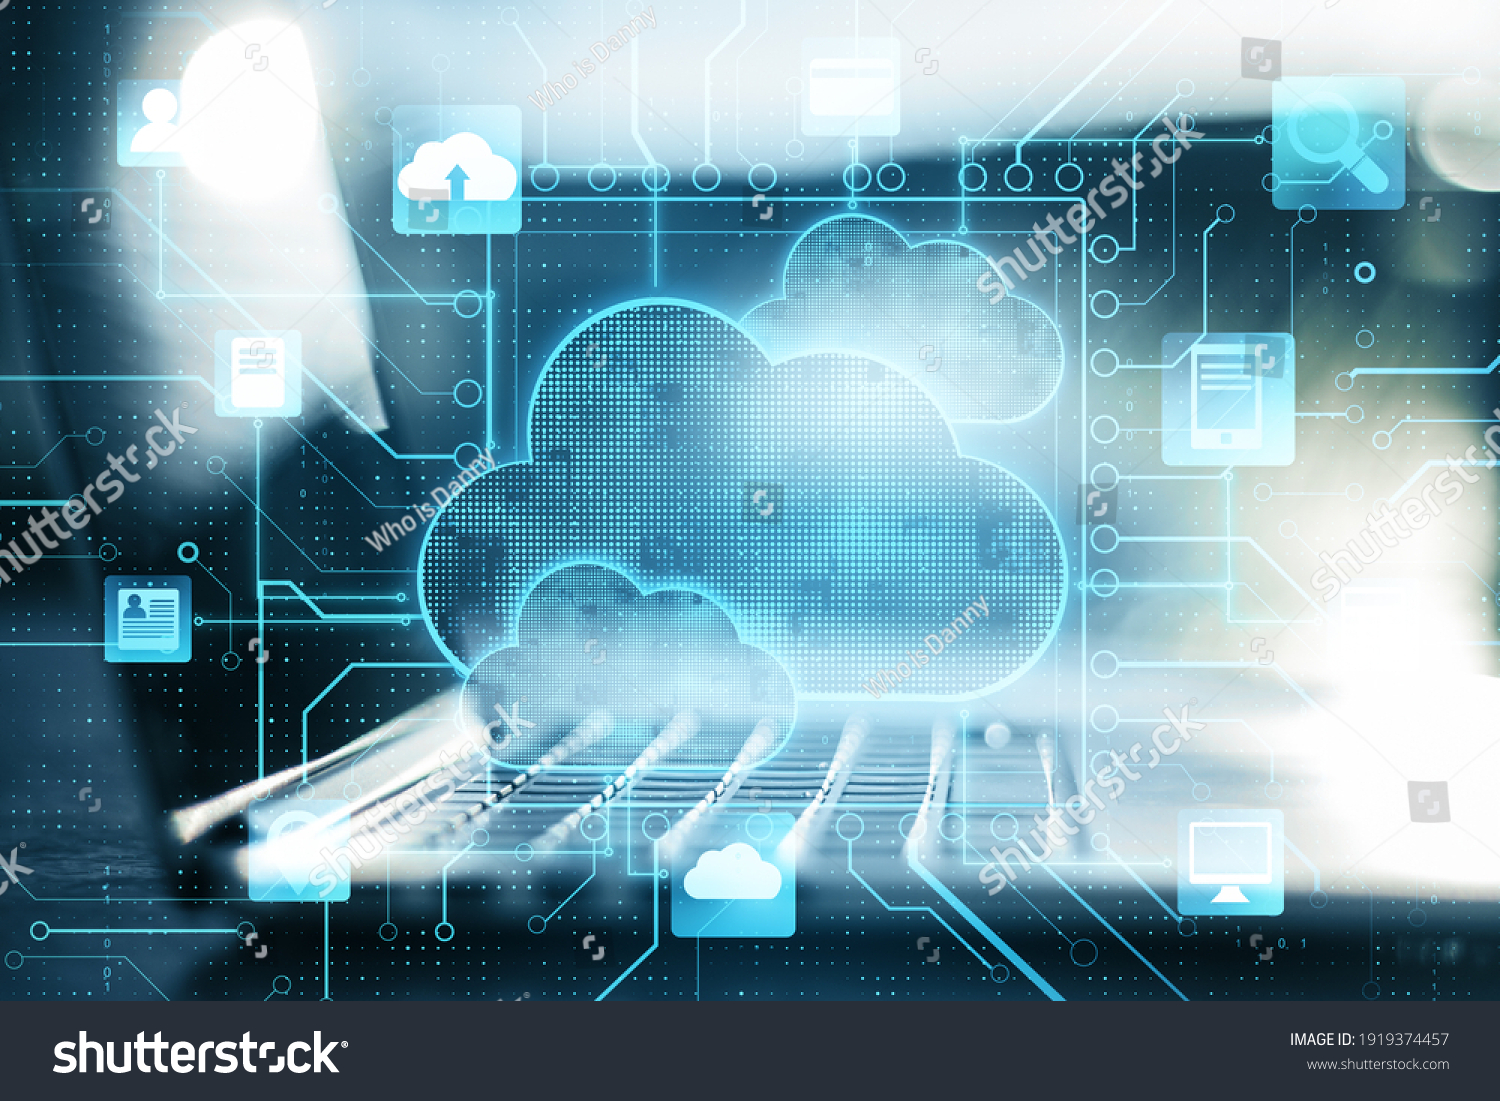 Business cloud computing: digital screen with application cloud service icons and blurry laptop at background #1919374457